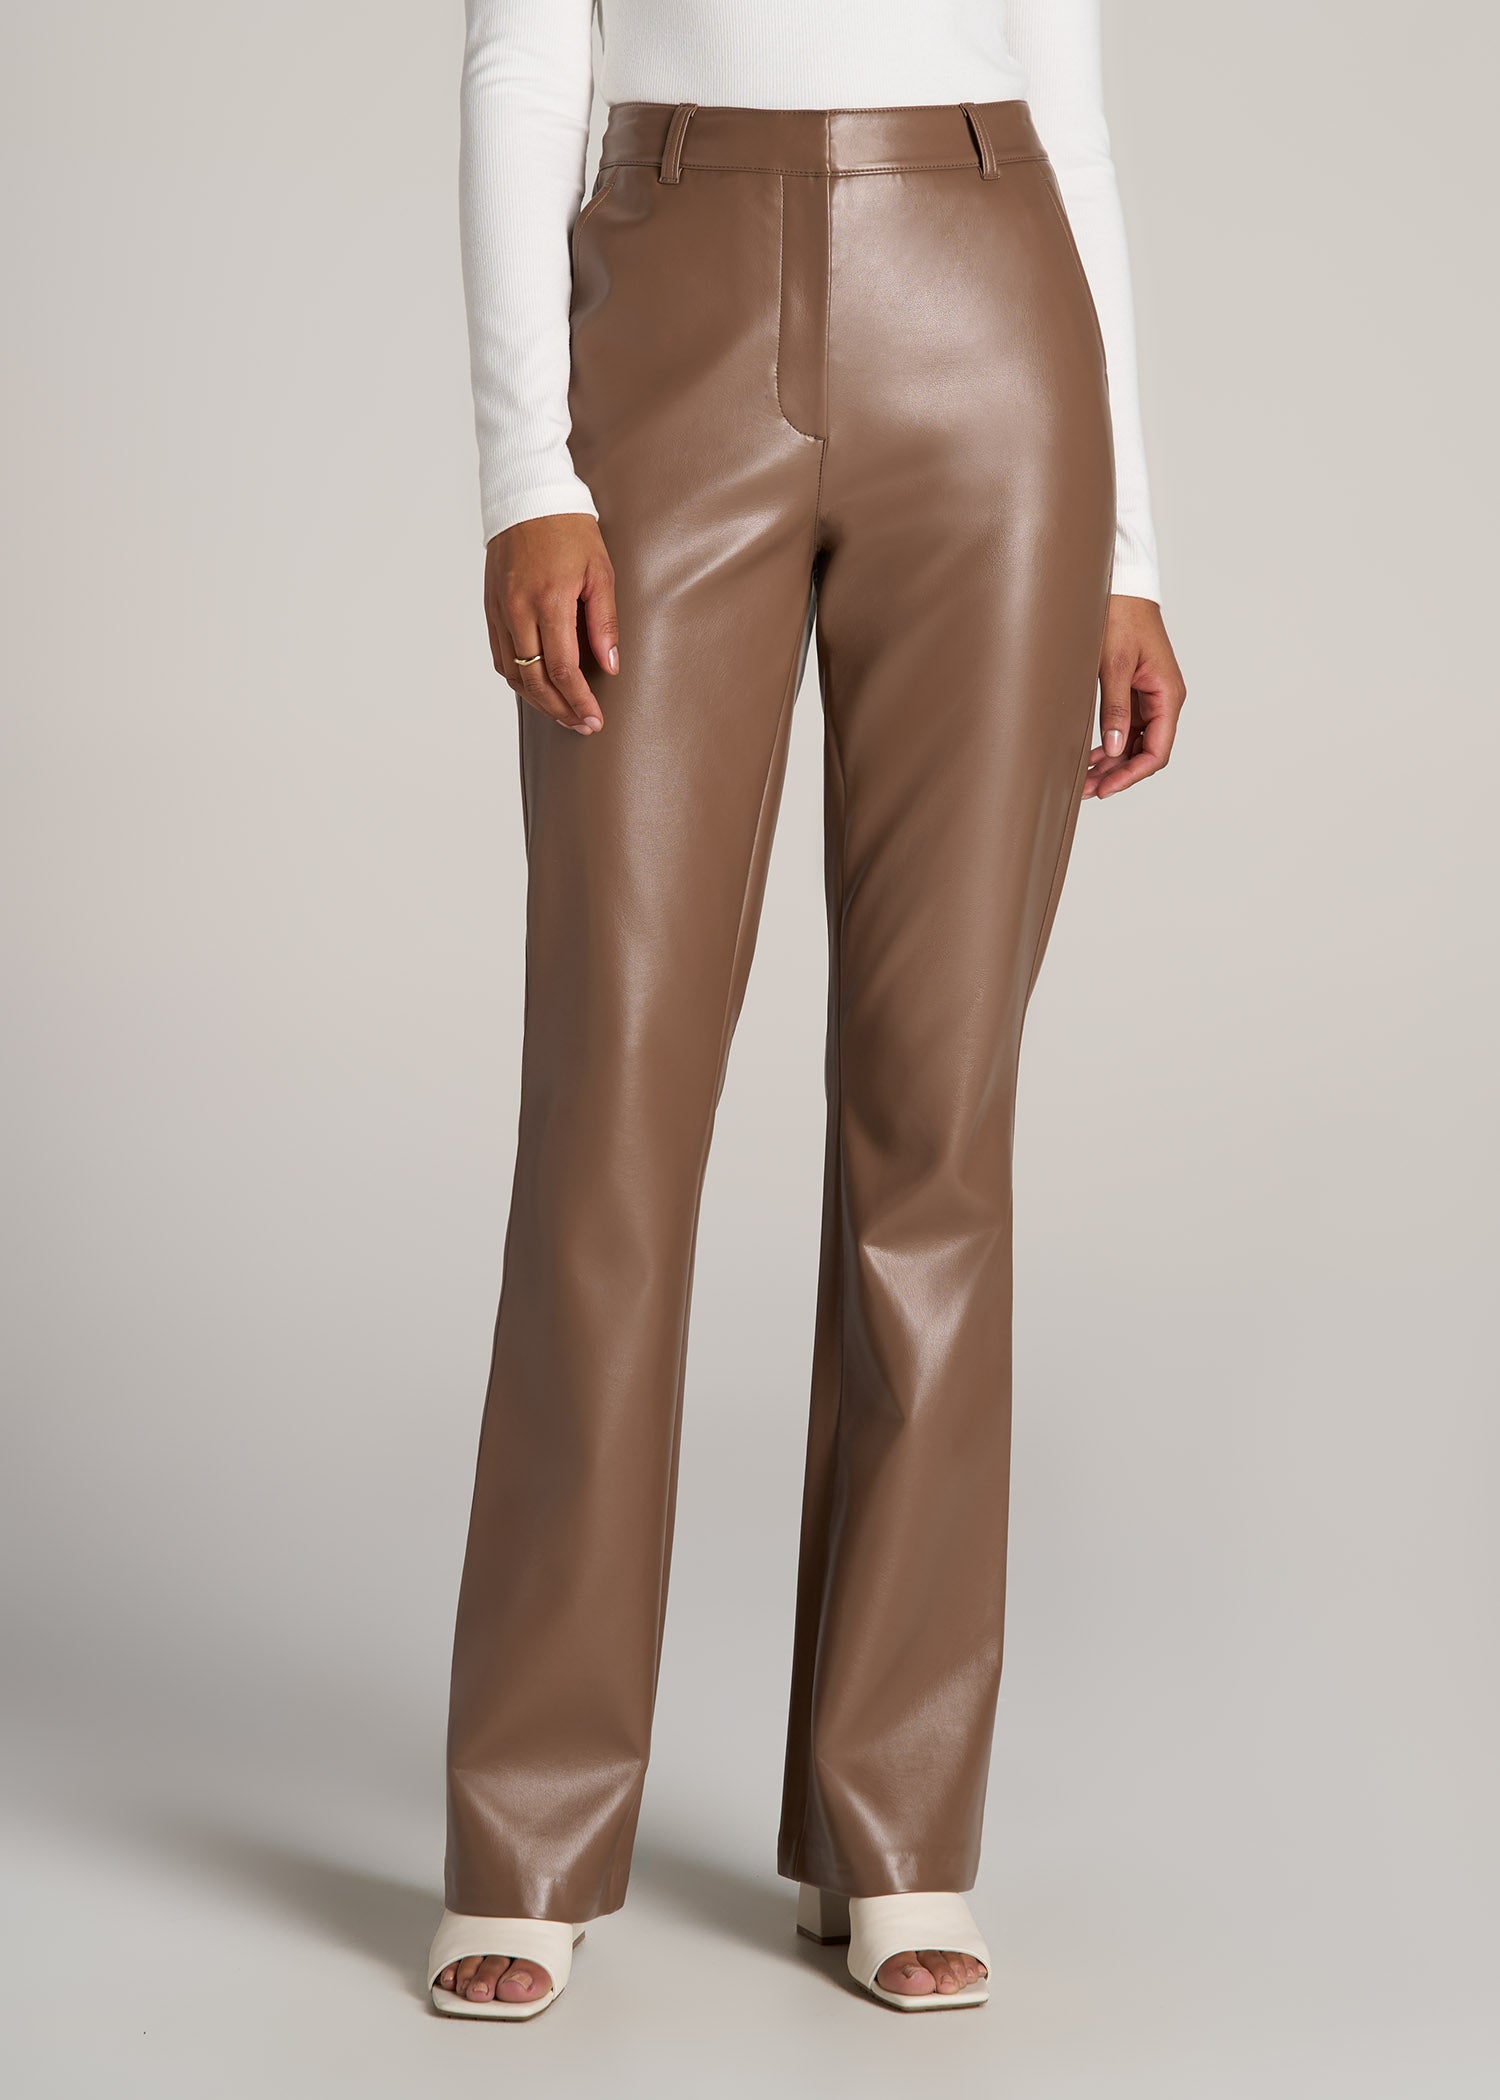 High Rise Flare Faux Leather Pants for Tall Women in Aztec Brown